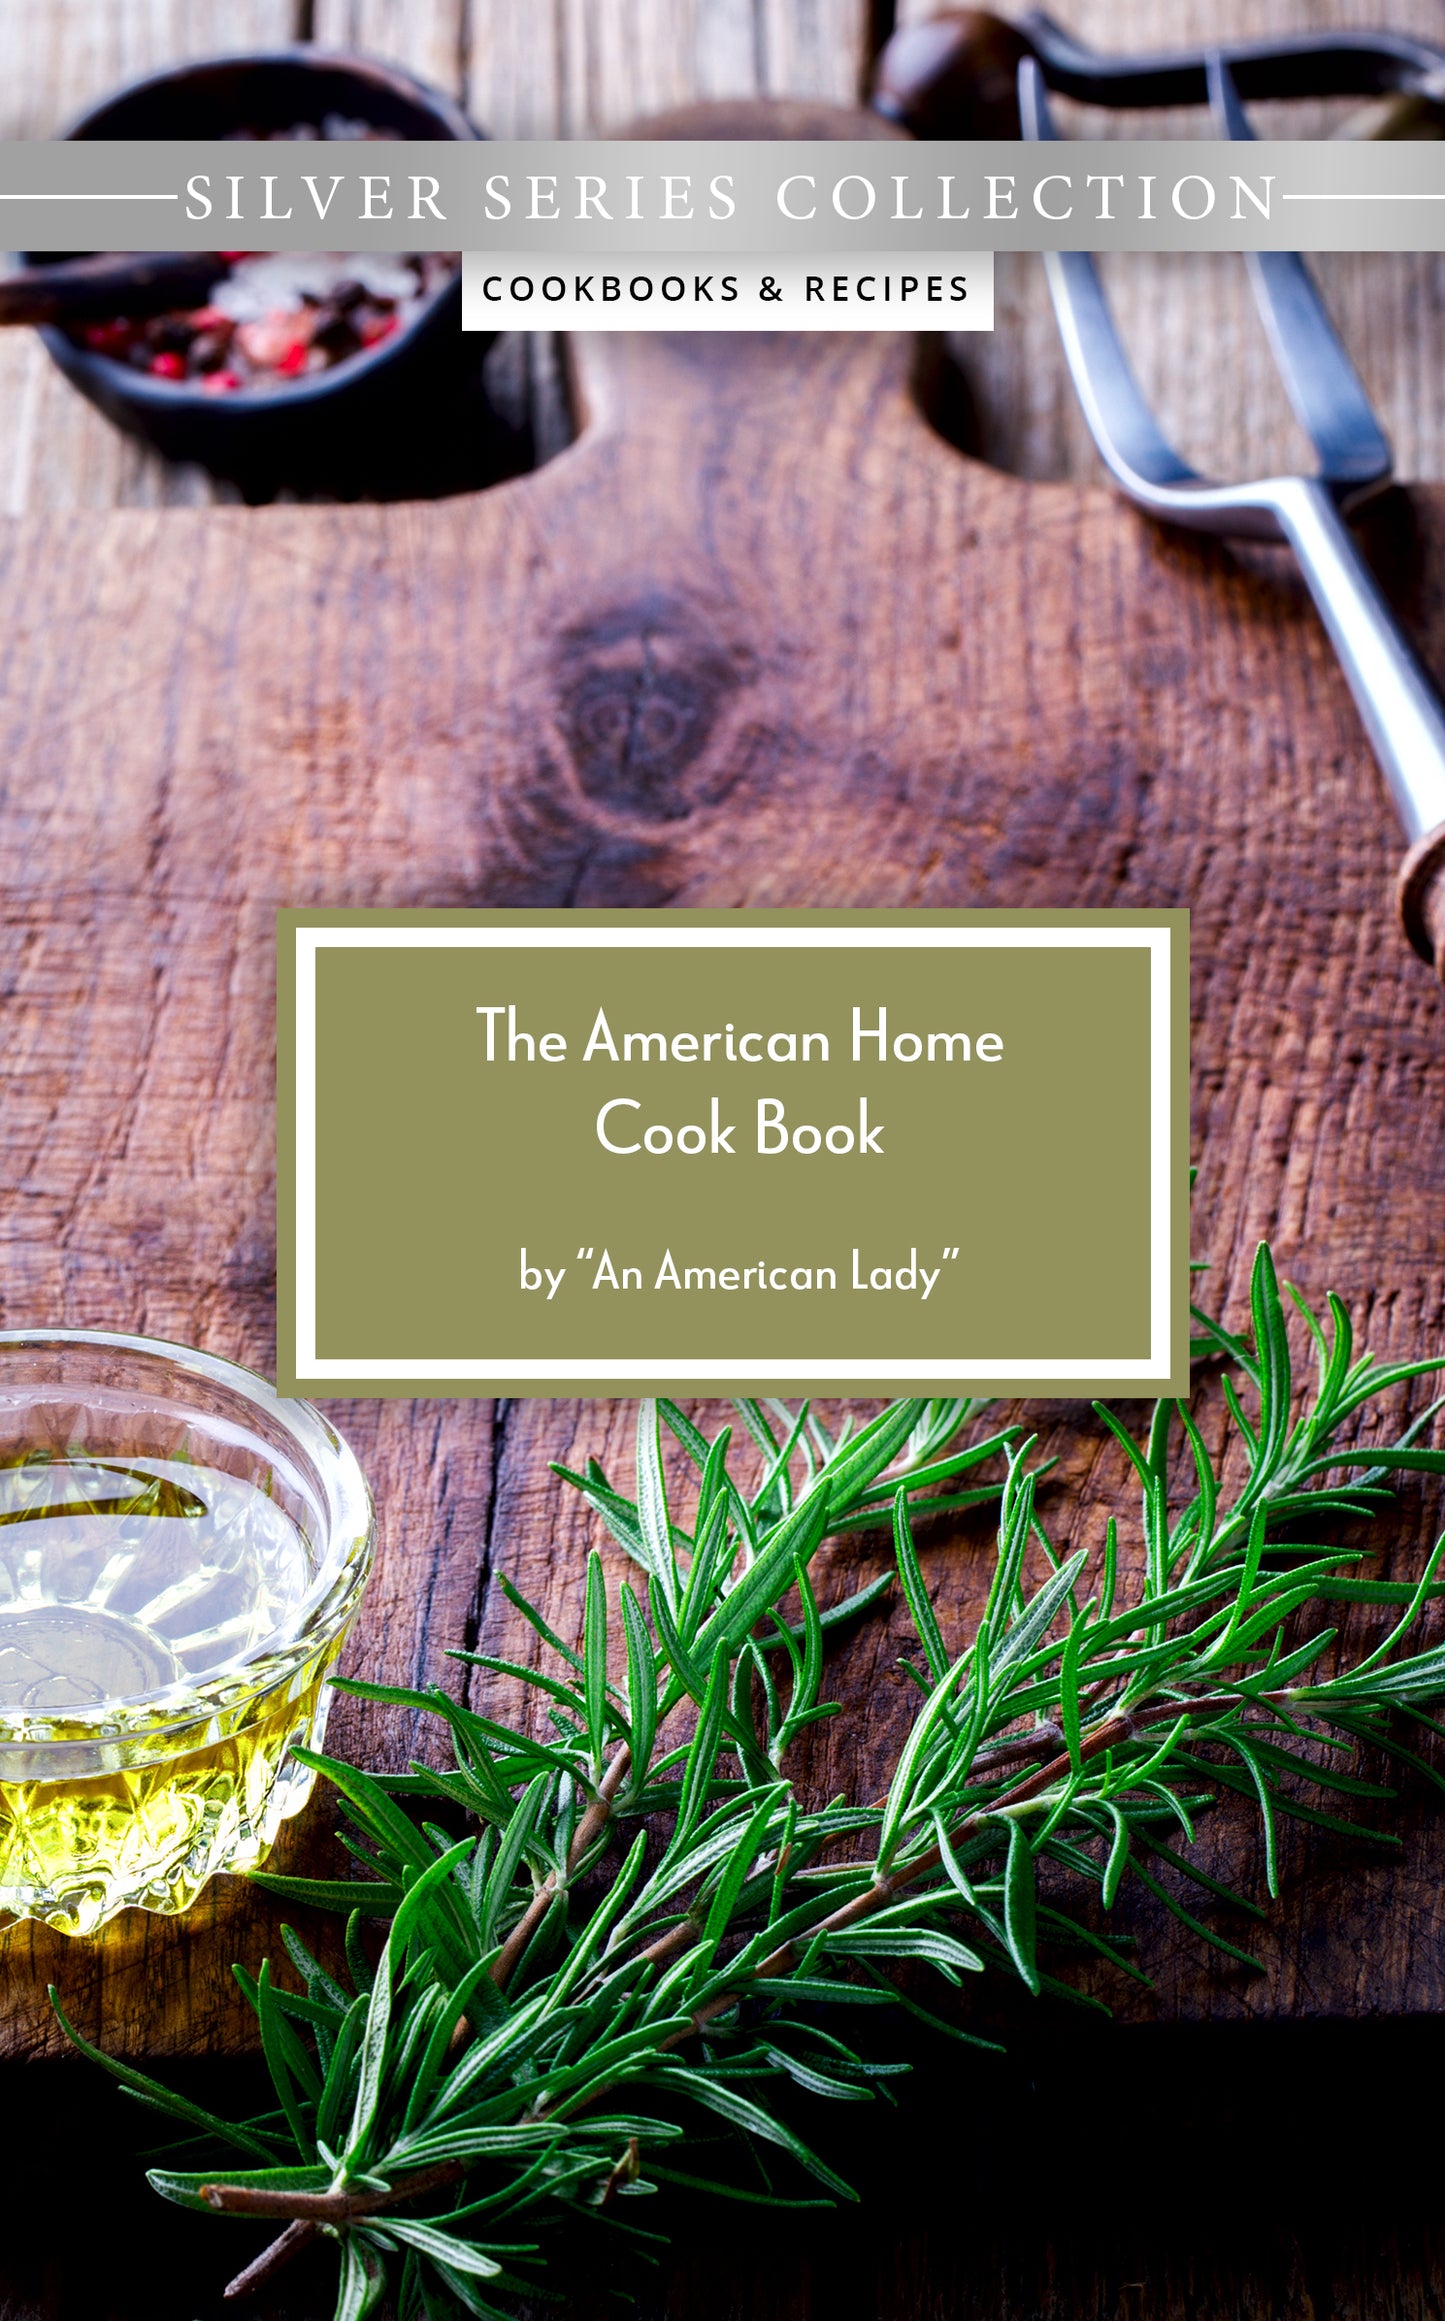 The American Home Cook Book